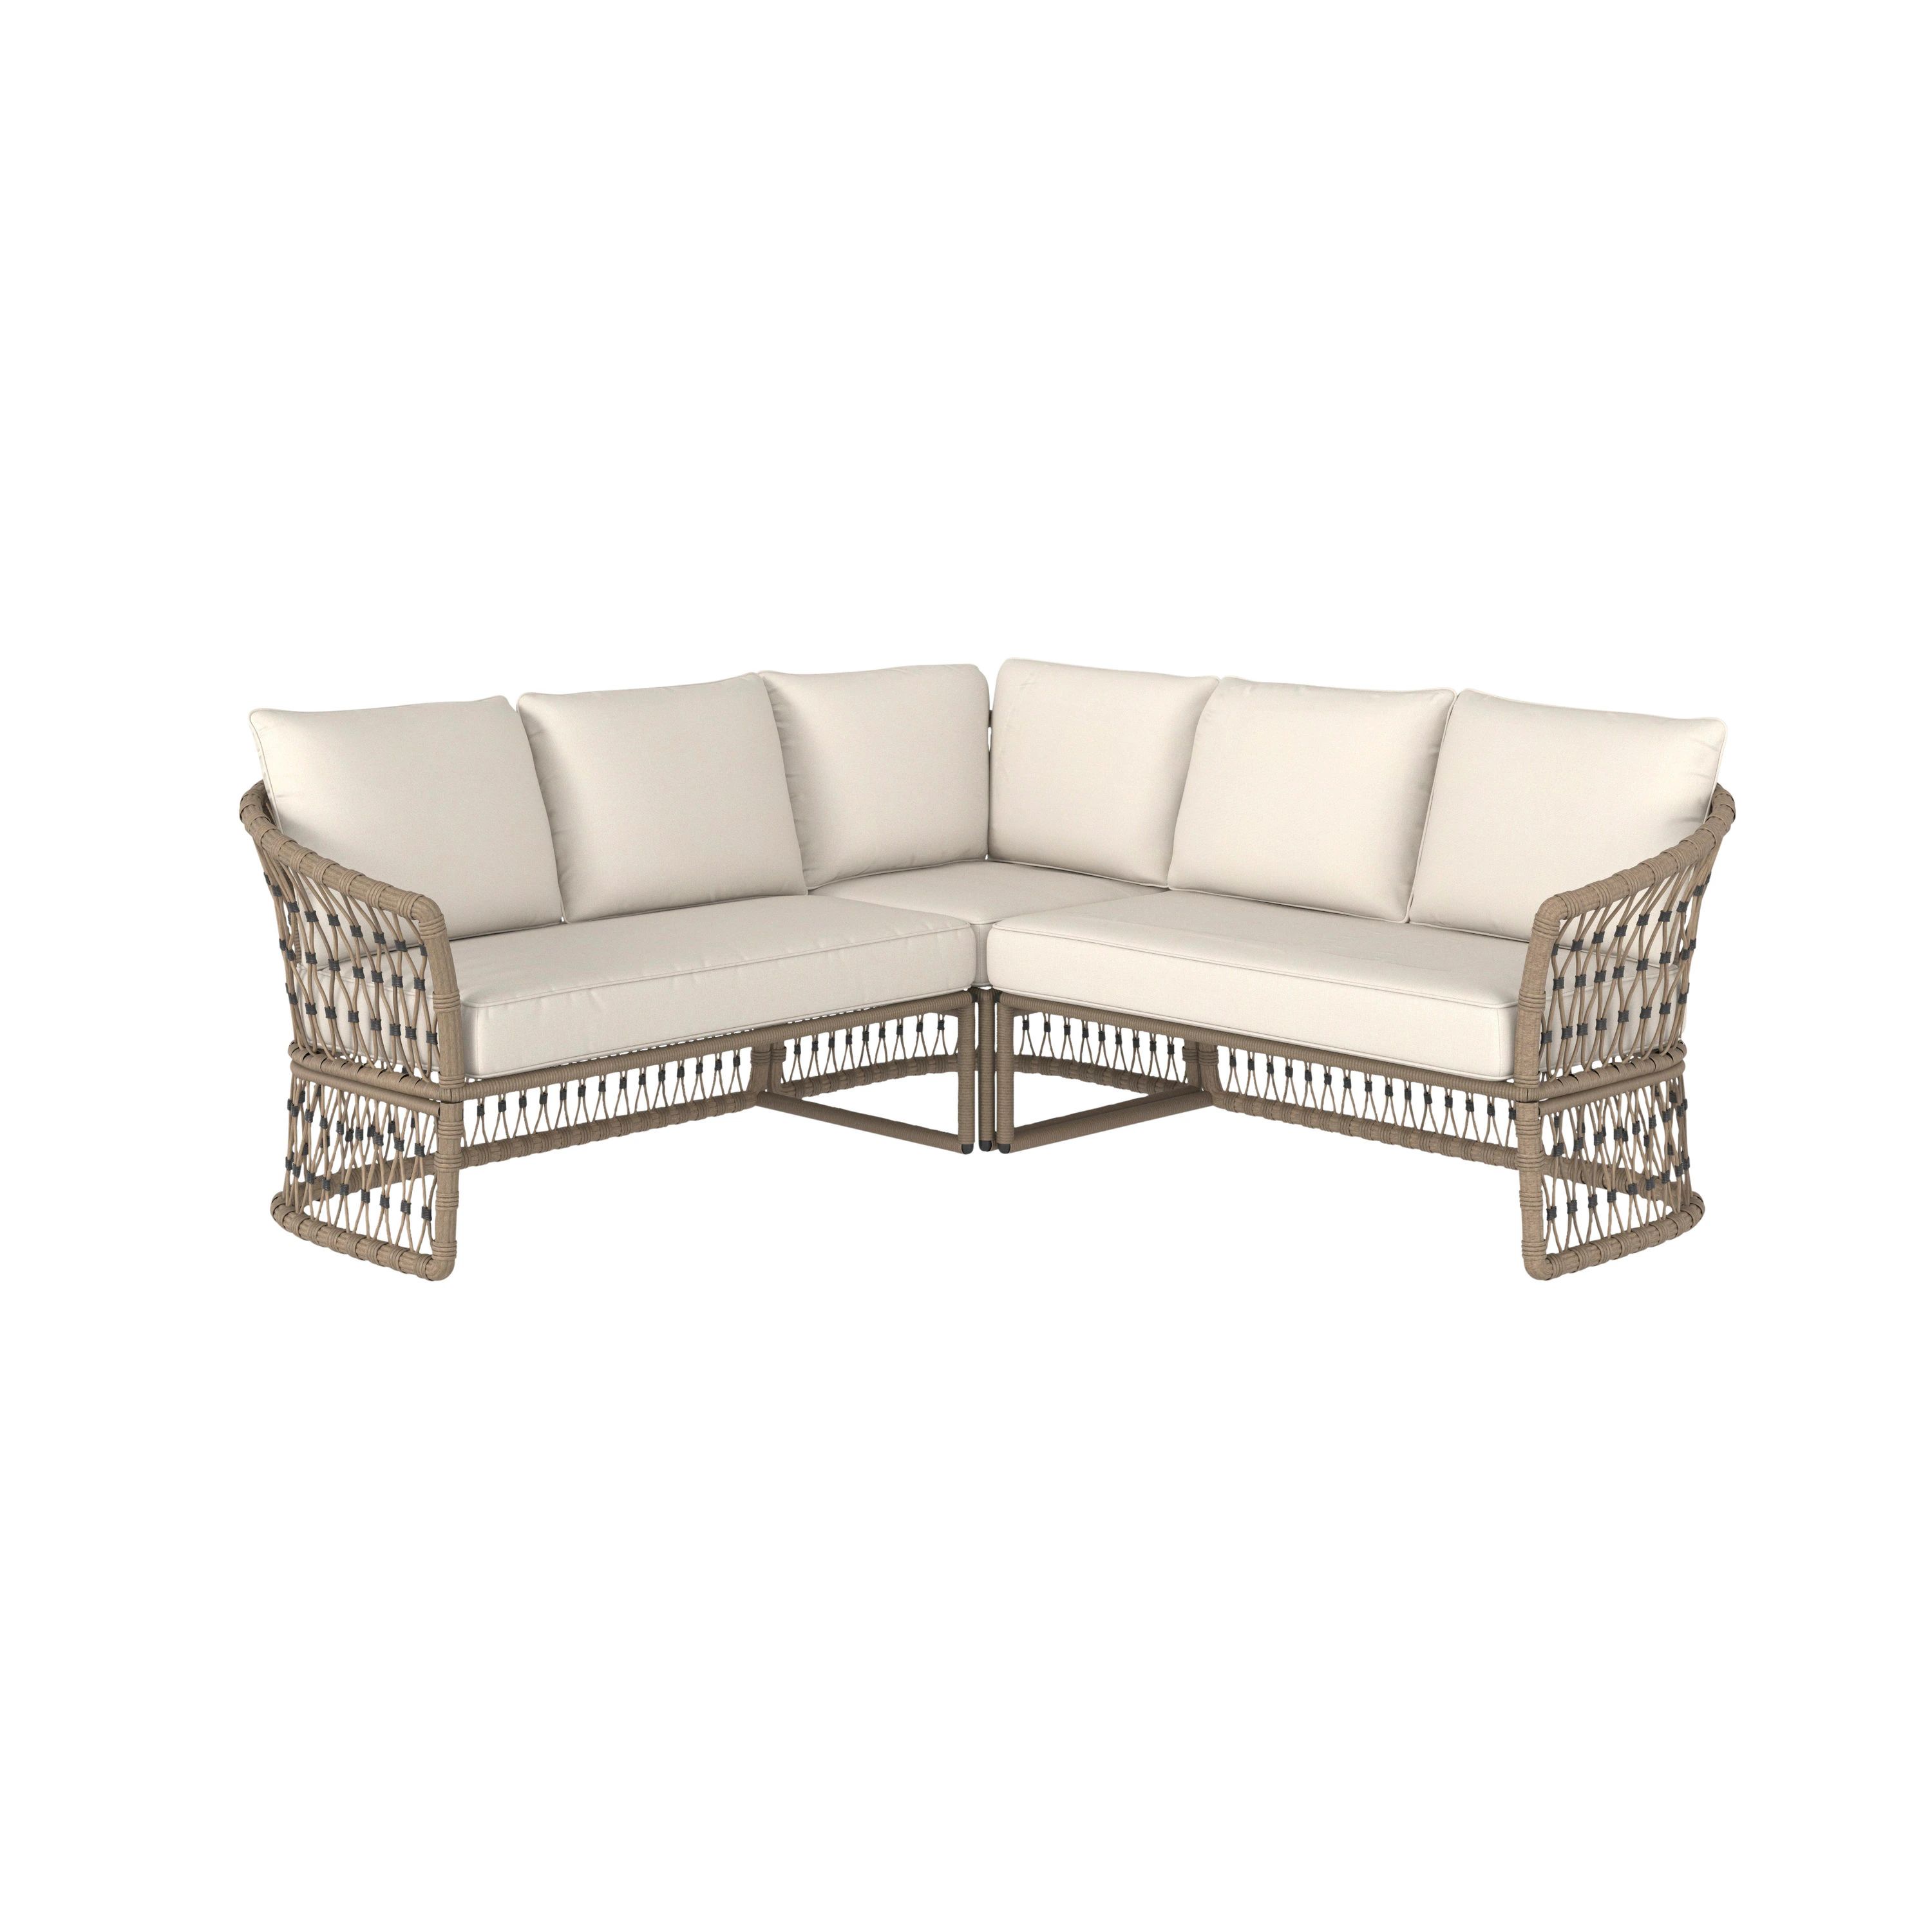 Style Selections Avery station Wicker Outdoor Sectional with Off-white Cushion(S) and Steel Frame | Lowe's